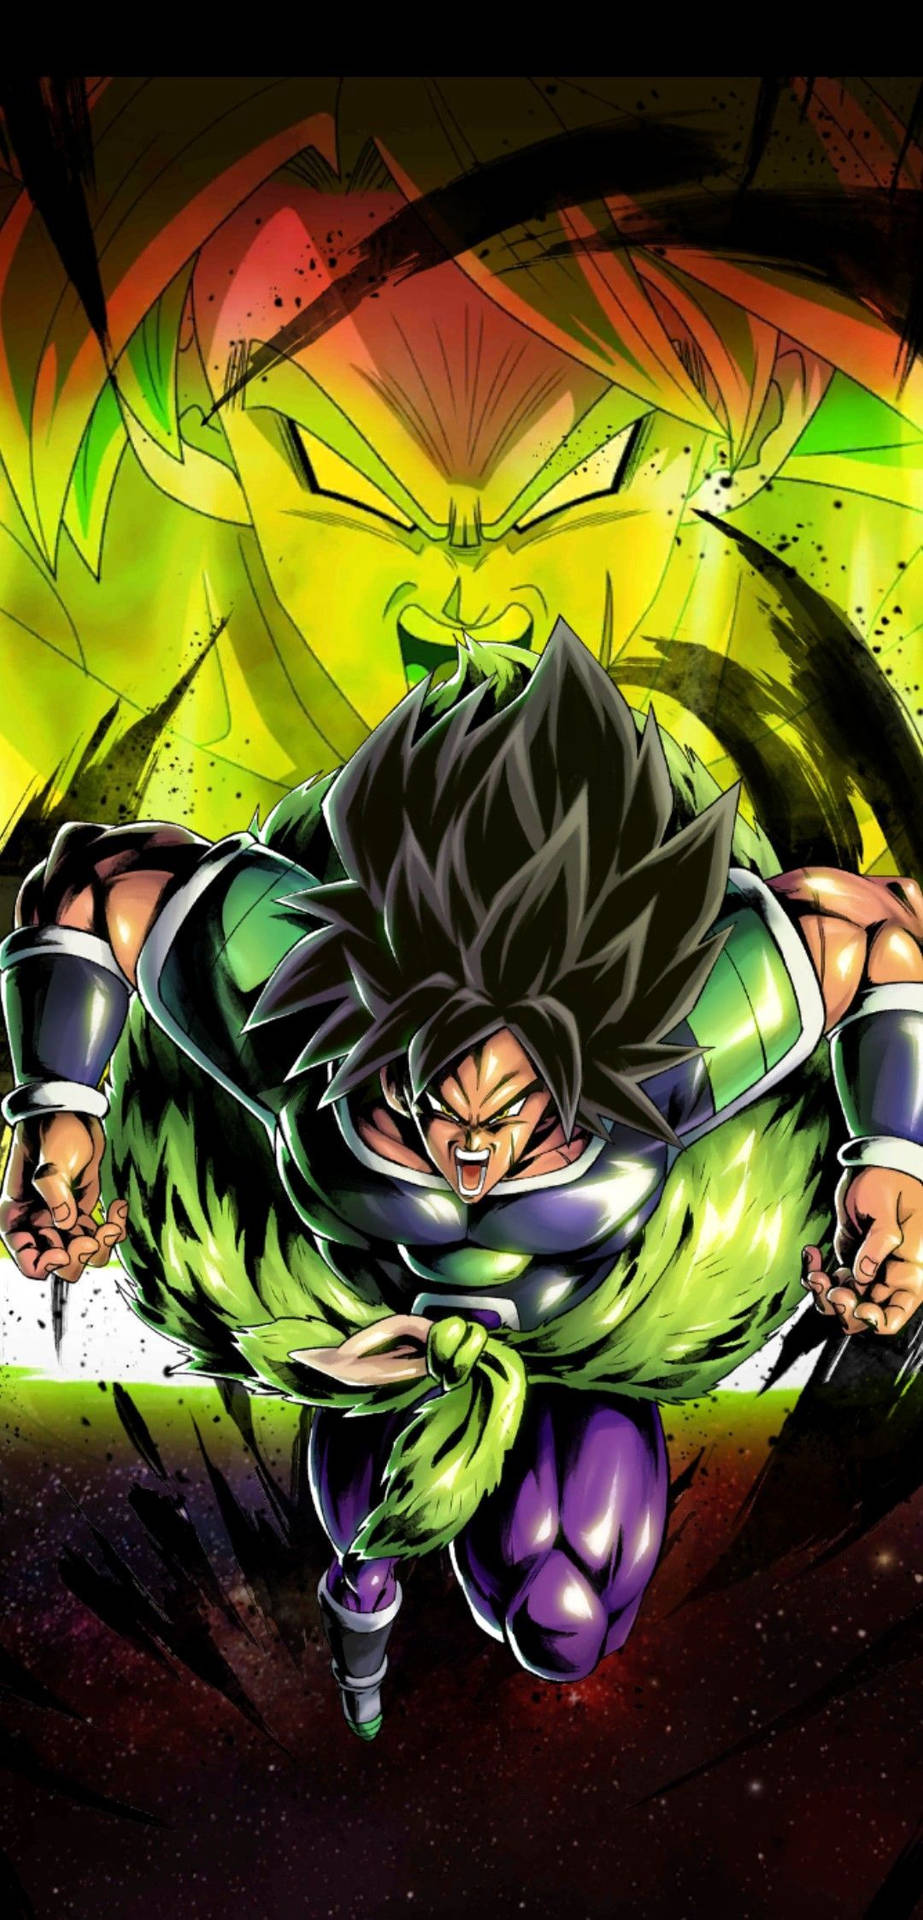 Enraged Broly Frieza Force Armor